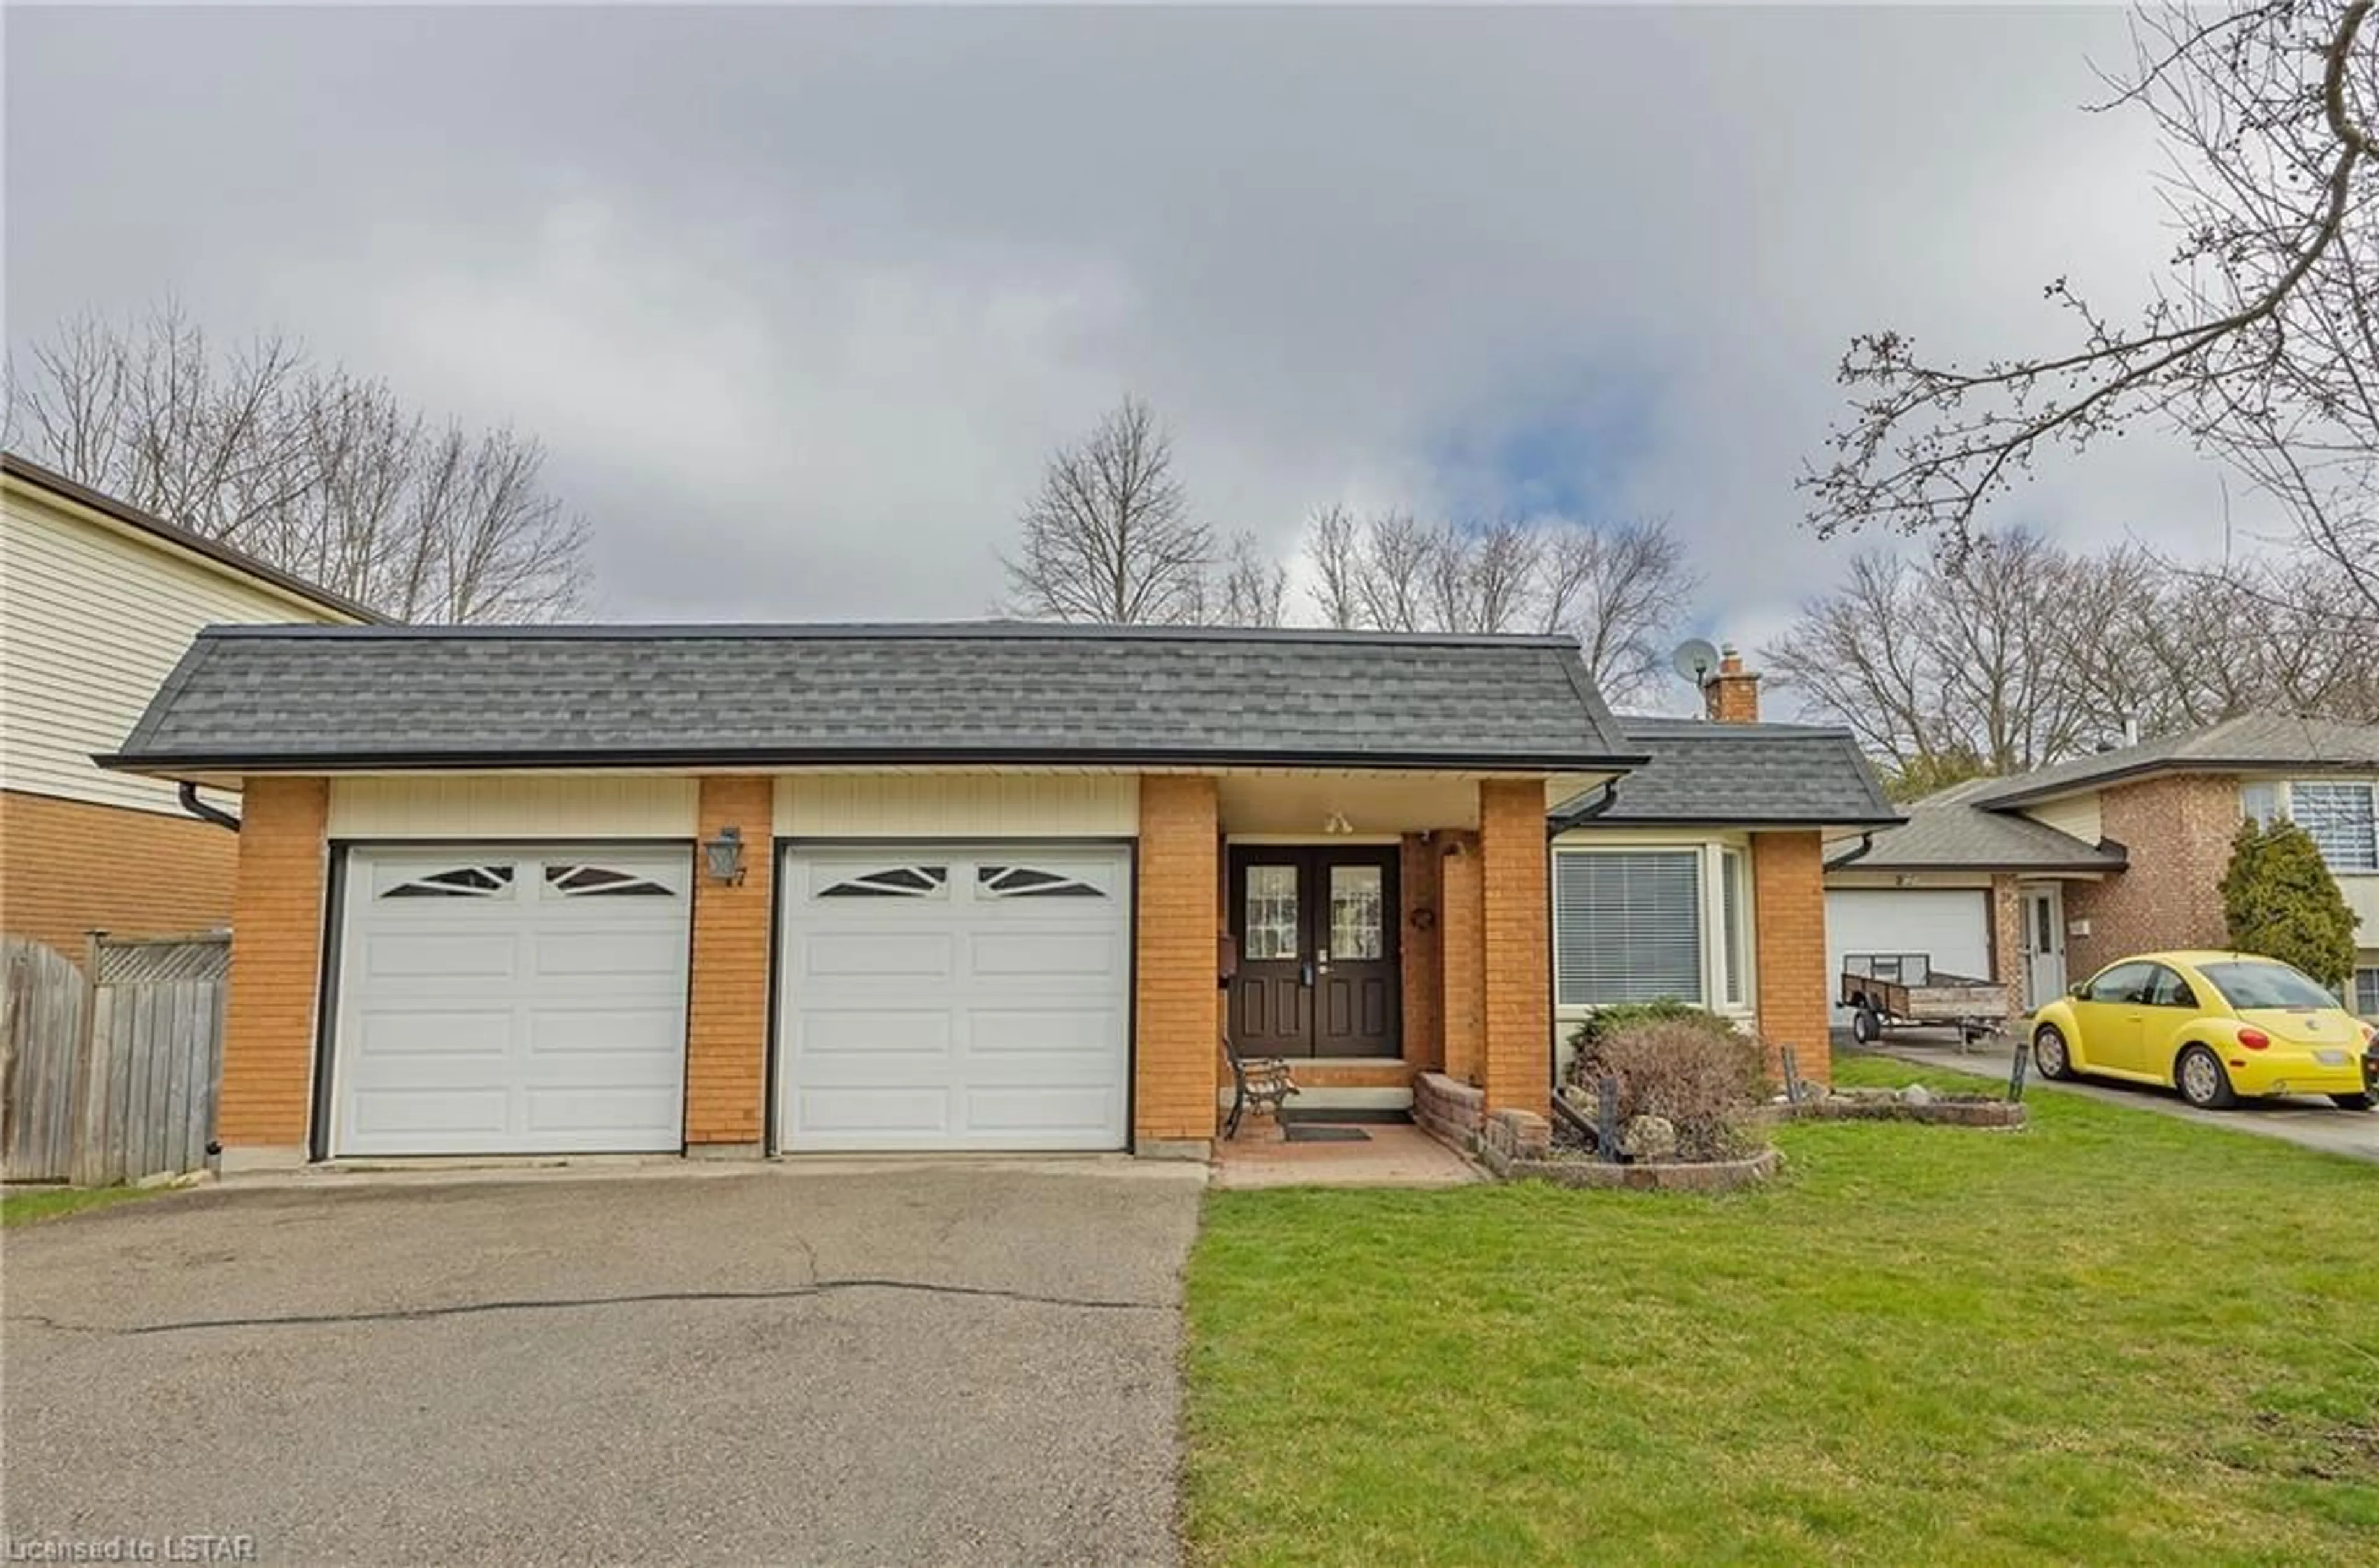 Frontside or backside of a home for 17 Harrow Crt, London Ontario N6C 5A6